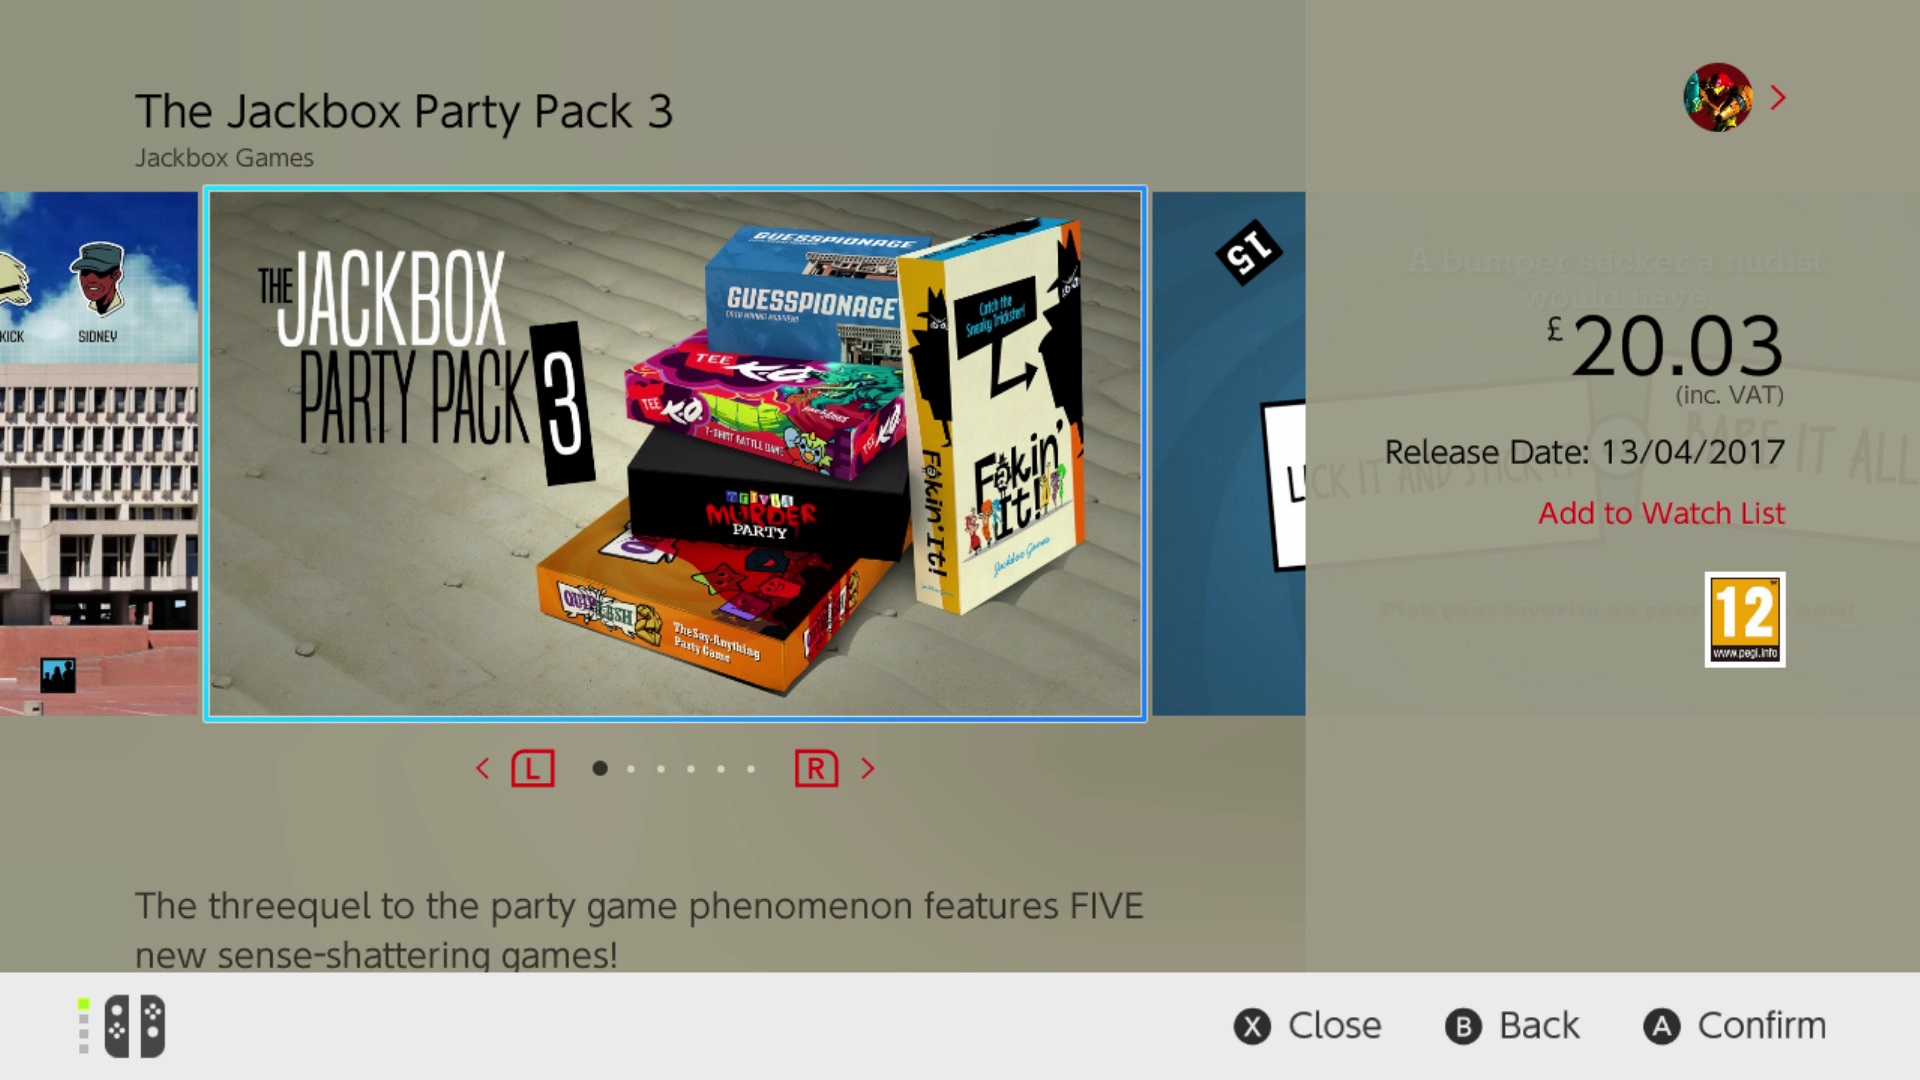 the jackbox party pack 8 switch